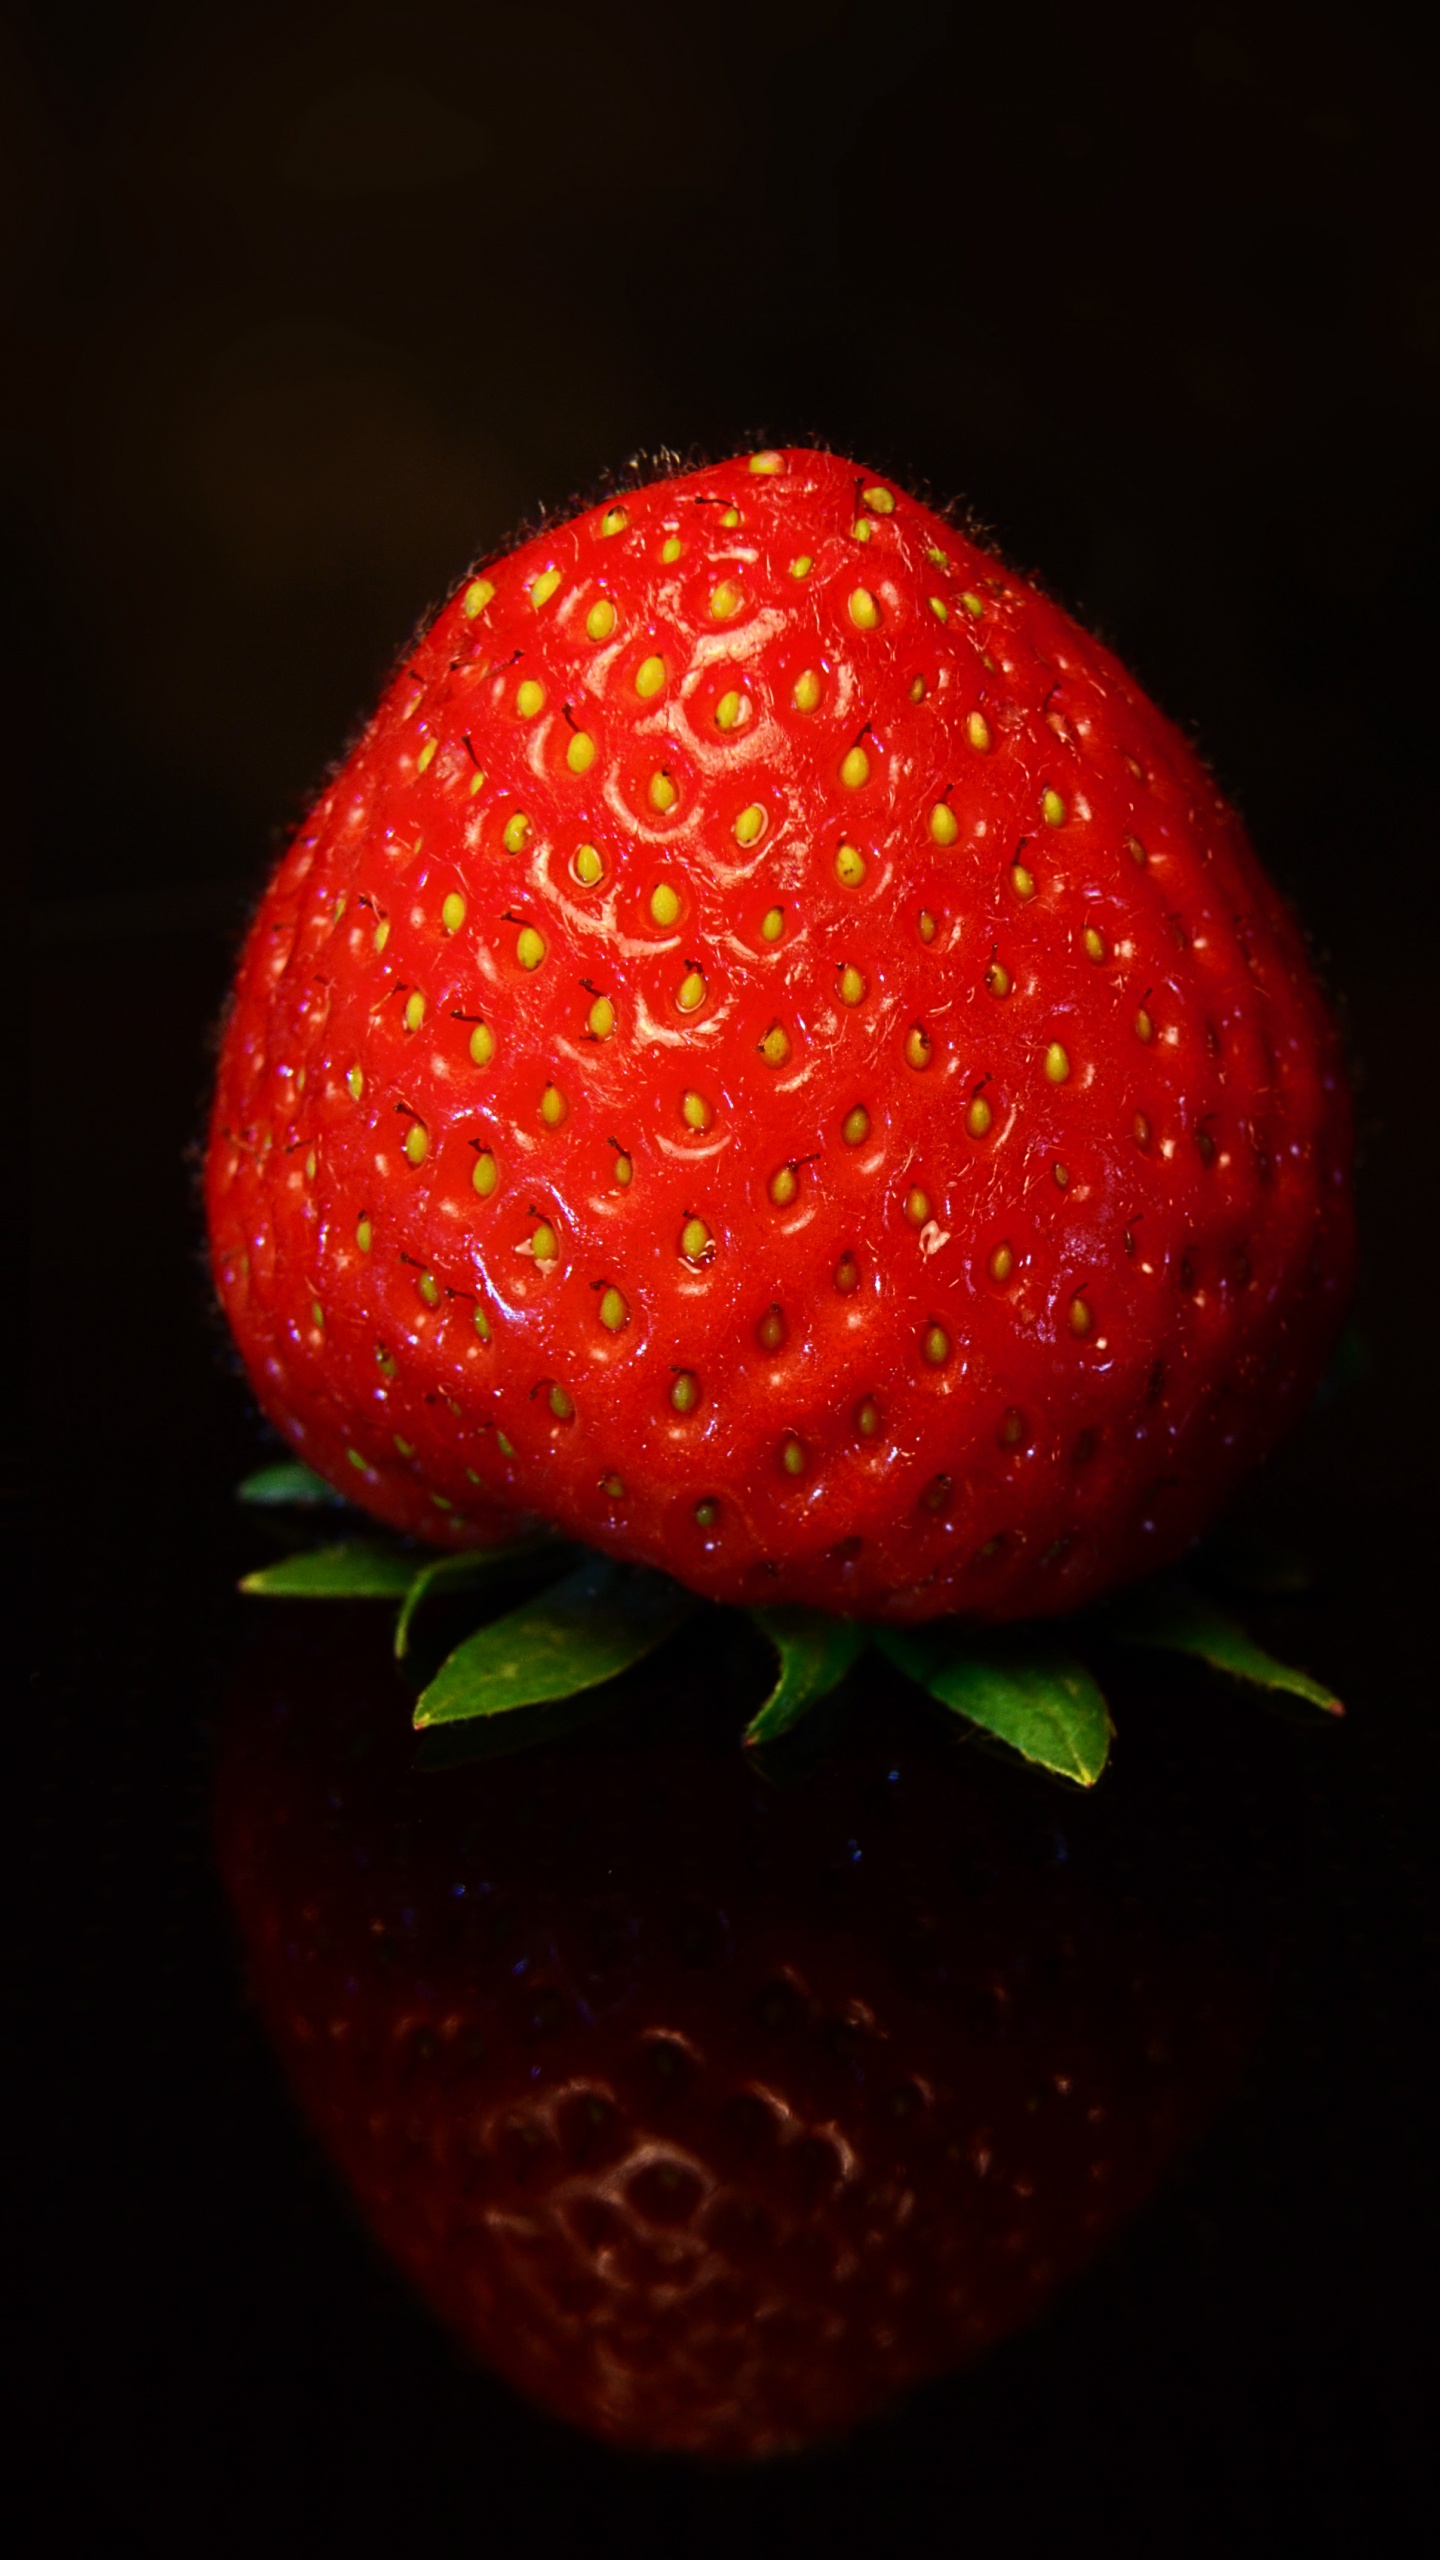 Red Strawberry Fruit in Close up Photography. Wallpaper in 1440x2560 Resolution